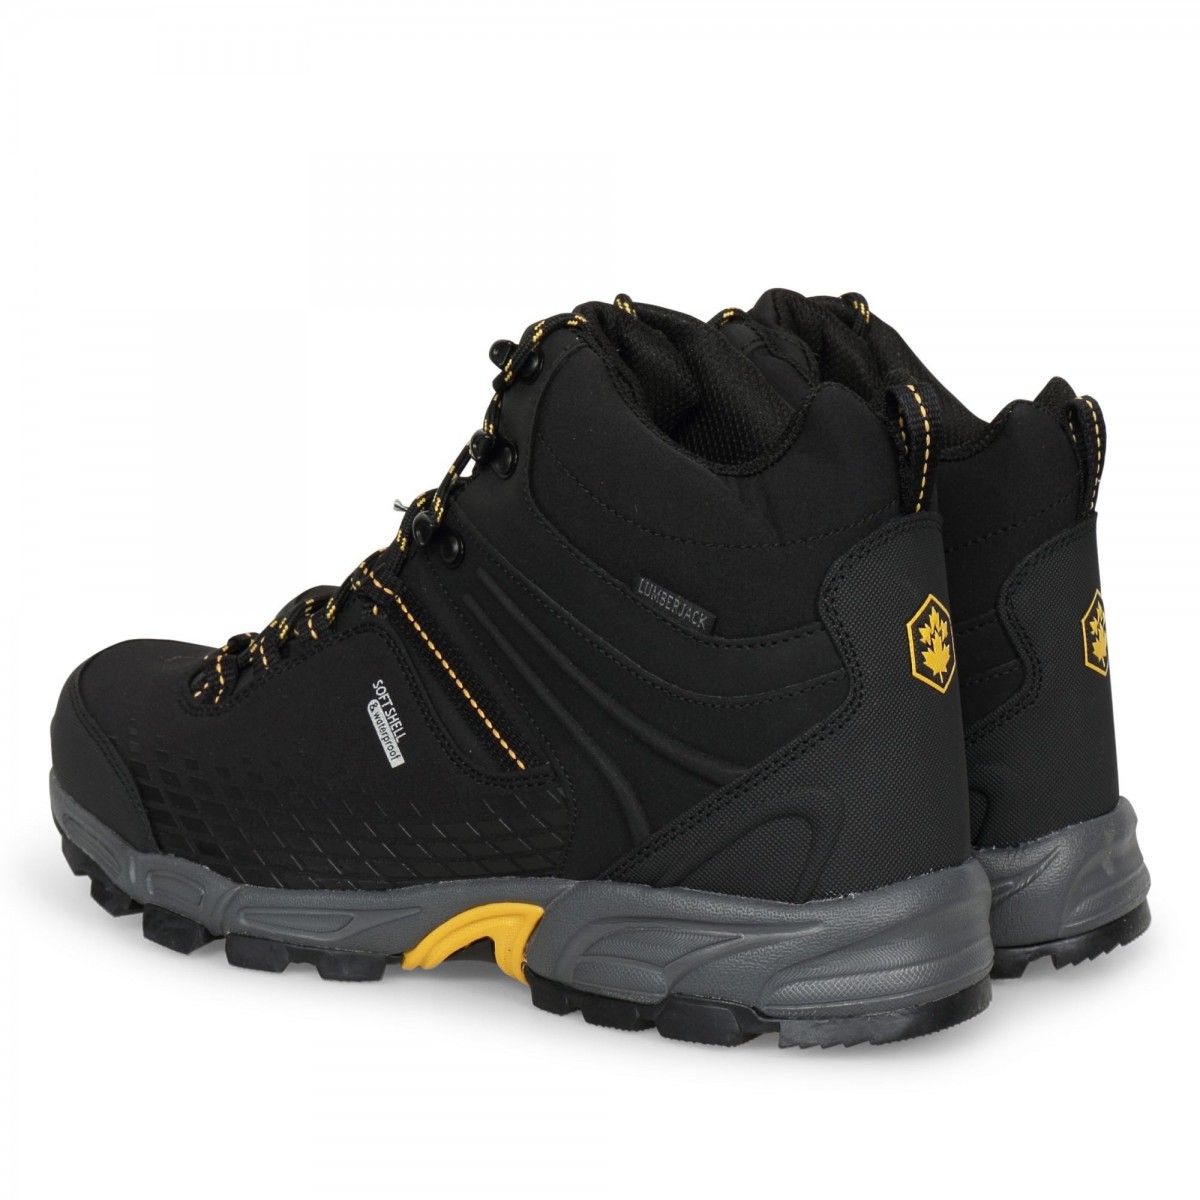 SHELL HIKING BOOT